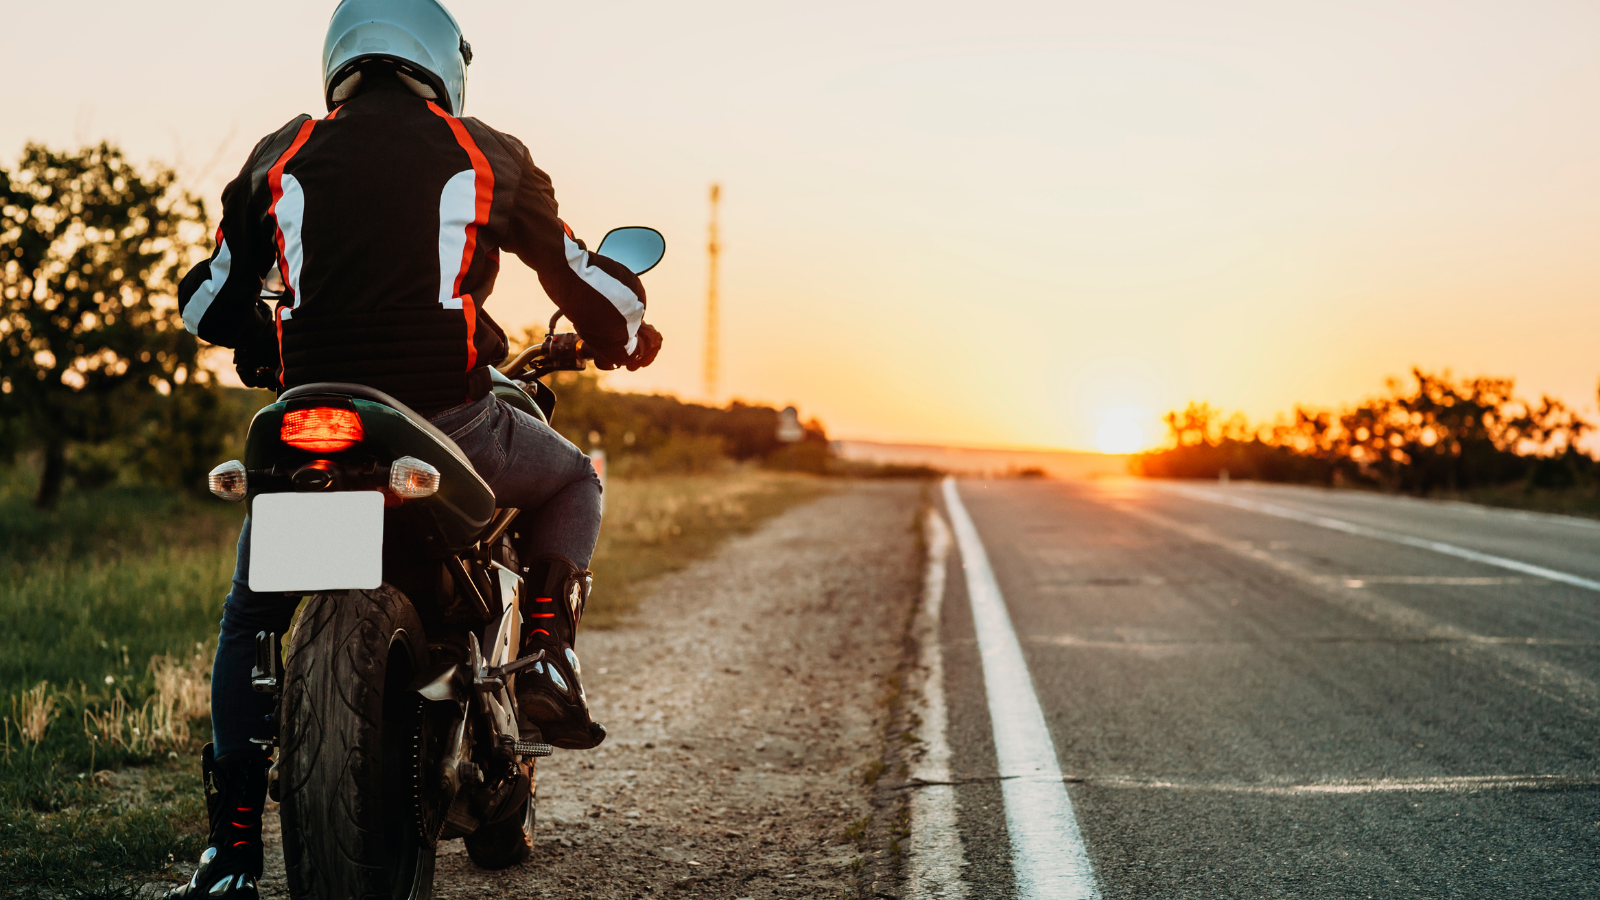 Motorcycle Season Isn't Over! 10 Ways to make the most of Limited Riding Time